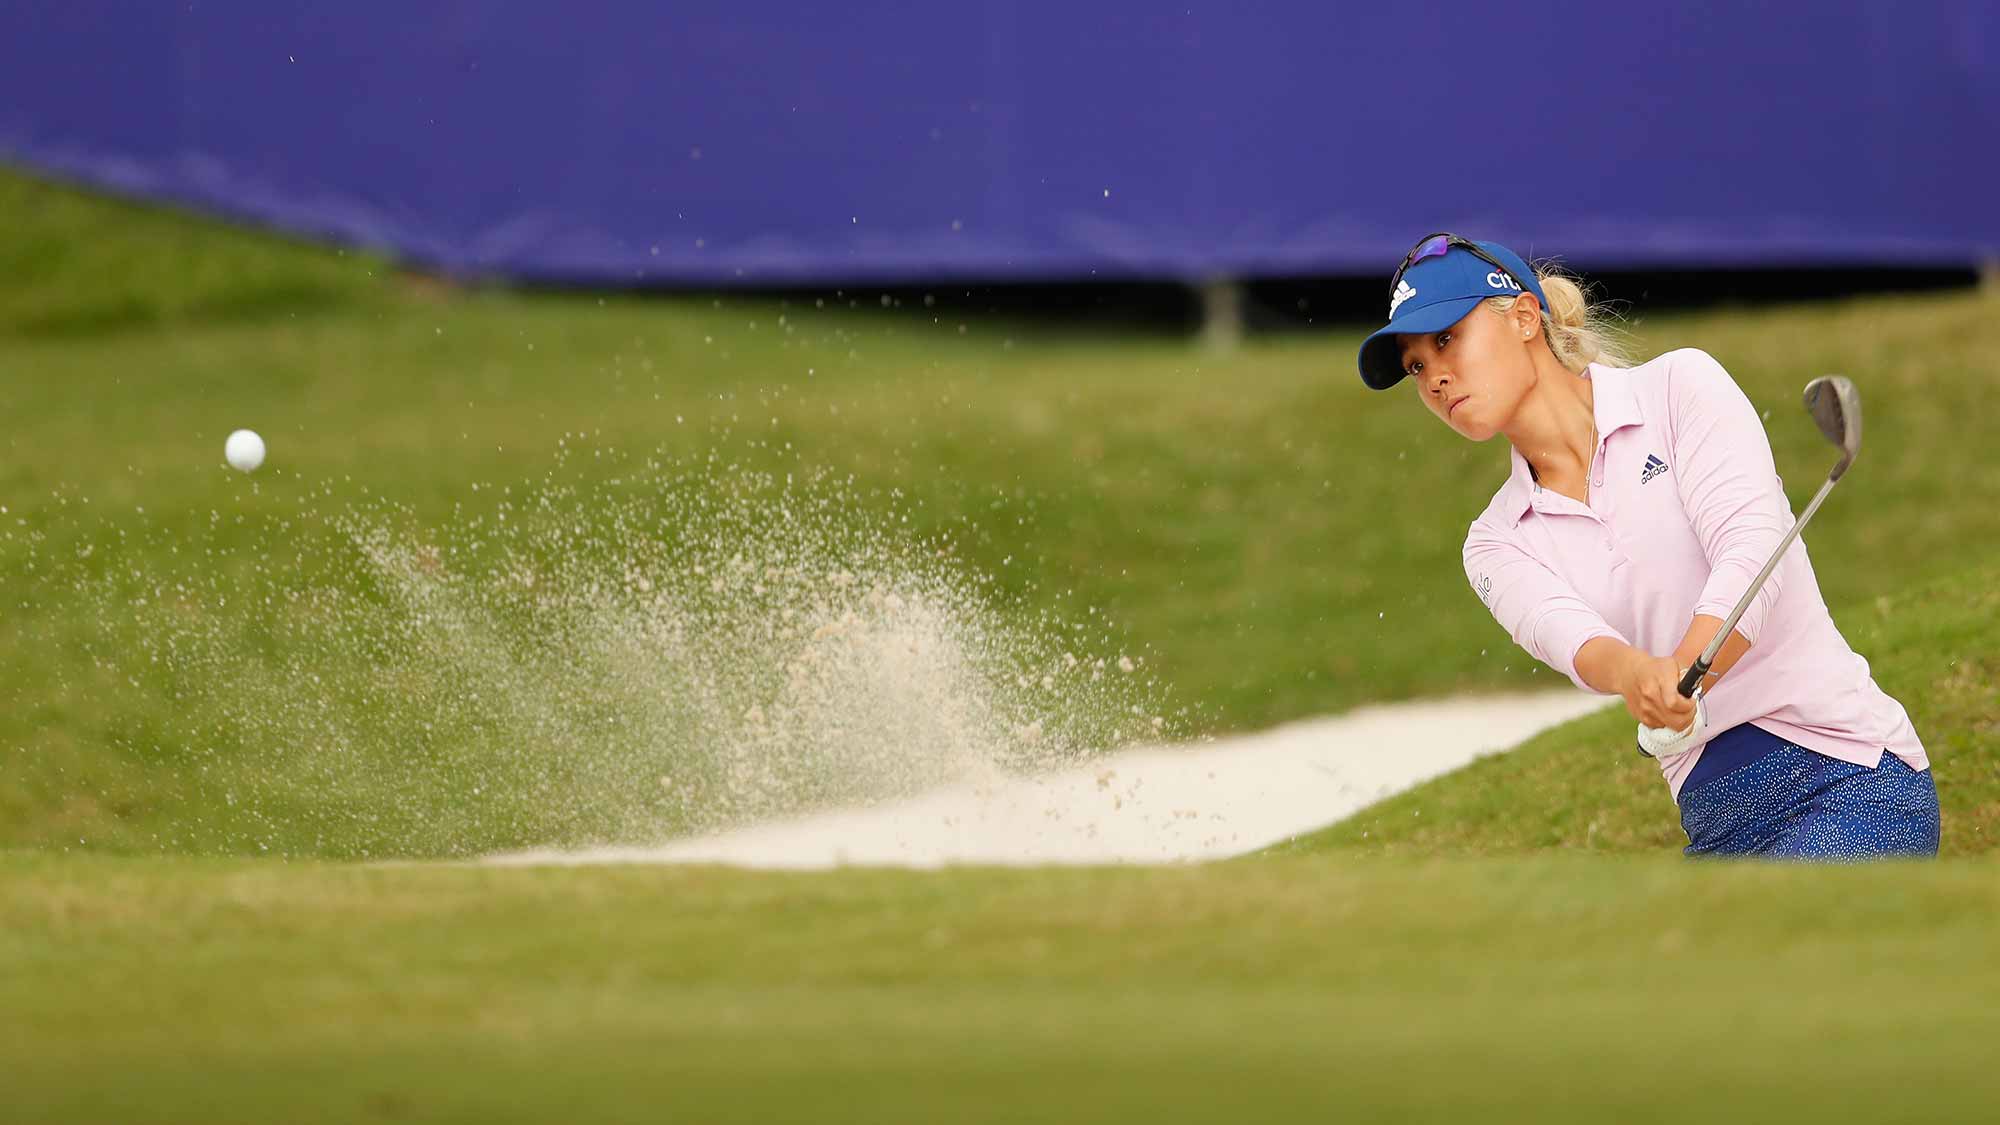 Danielle Kang of United States in action at the eighteen hole during the first round of the Swinging Skirts LPGA Taiwan Championship at Ta Shee Golf & Country Club on October 25, 2018 in Taoyuan, Chinese Taipei